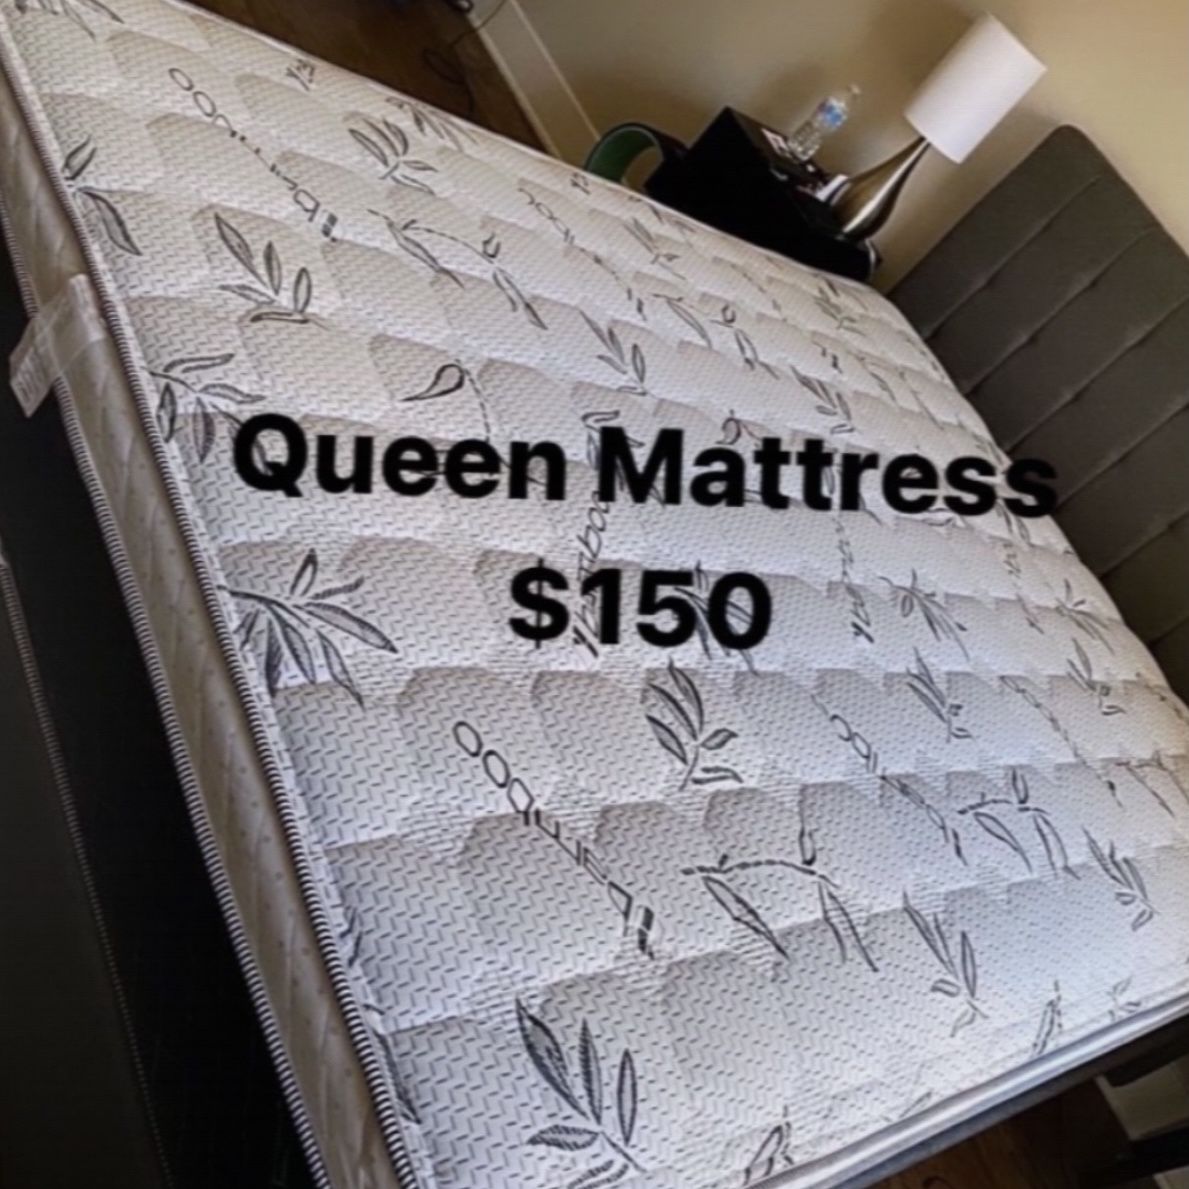 BRAND NEW PILLOW TOP MATTRESSES ✅ COLCHONES NUEVOS PILLOW TOP 💯‼️   QUEEN SIZE $150 ❌ $210 With Box Spring   FULL SIZE $140❌ $200 With Box Spring💥  